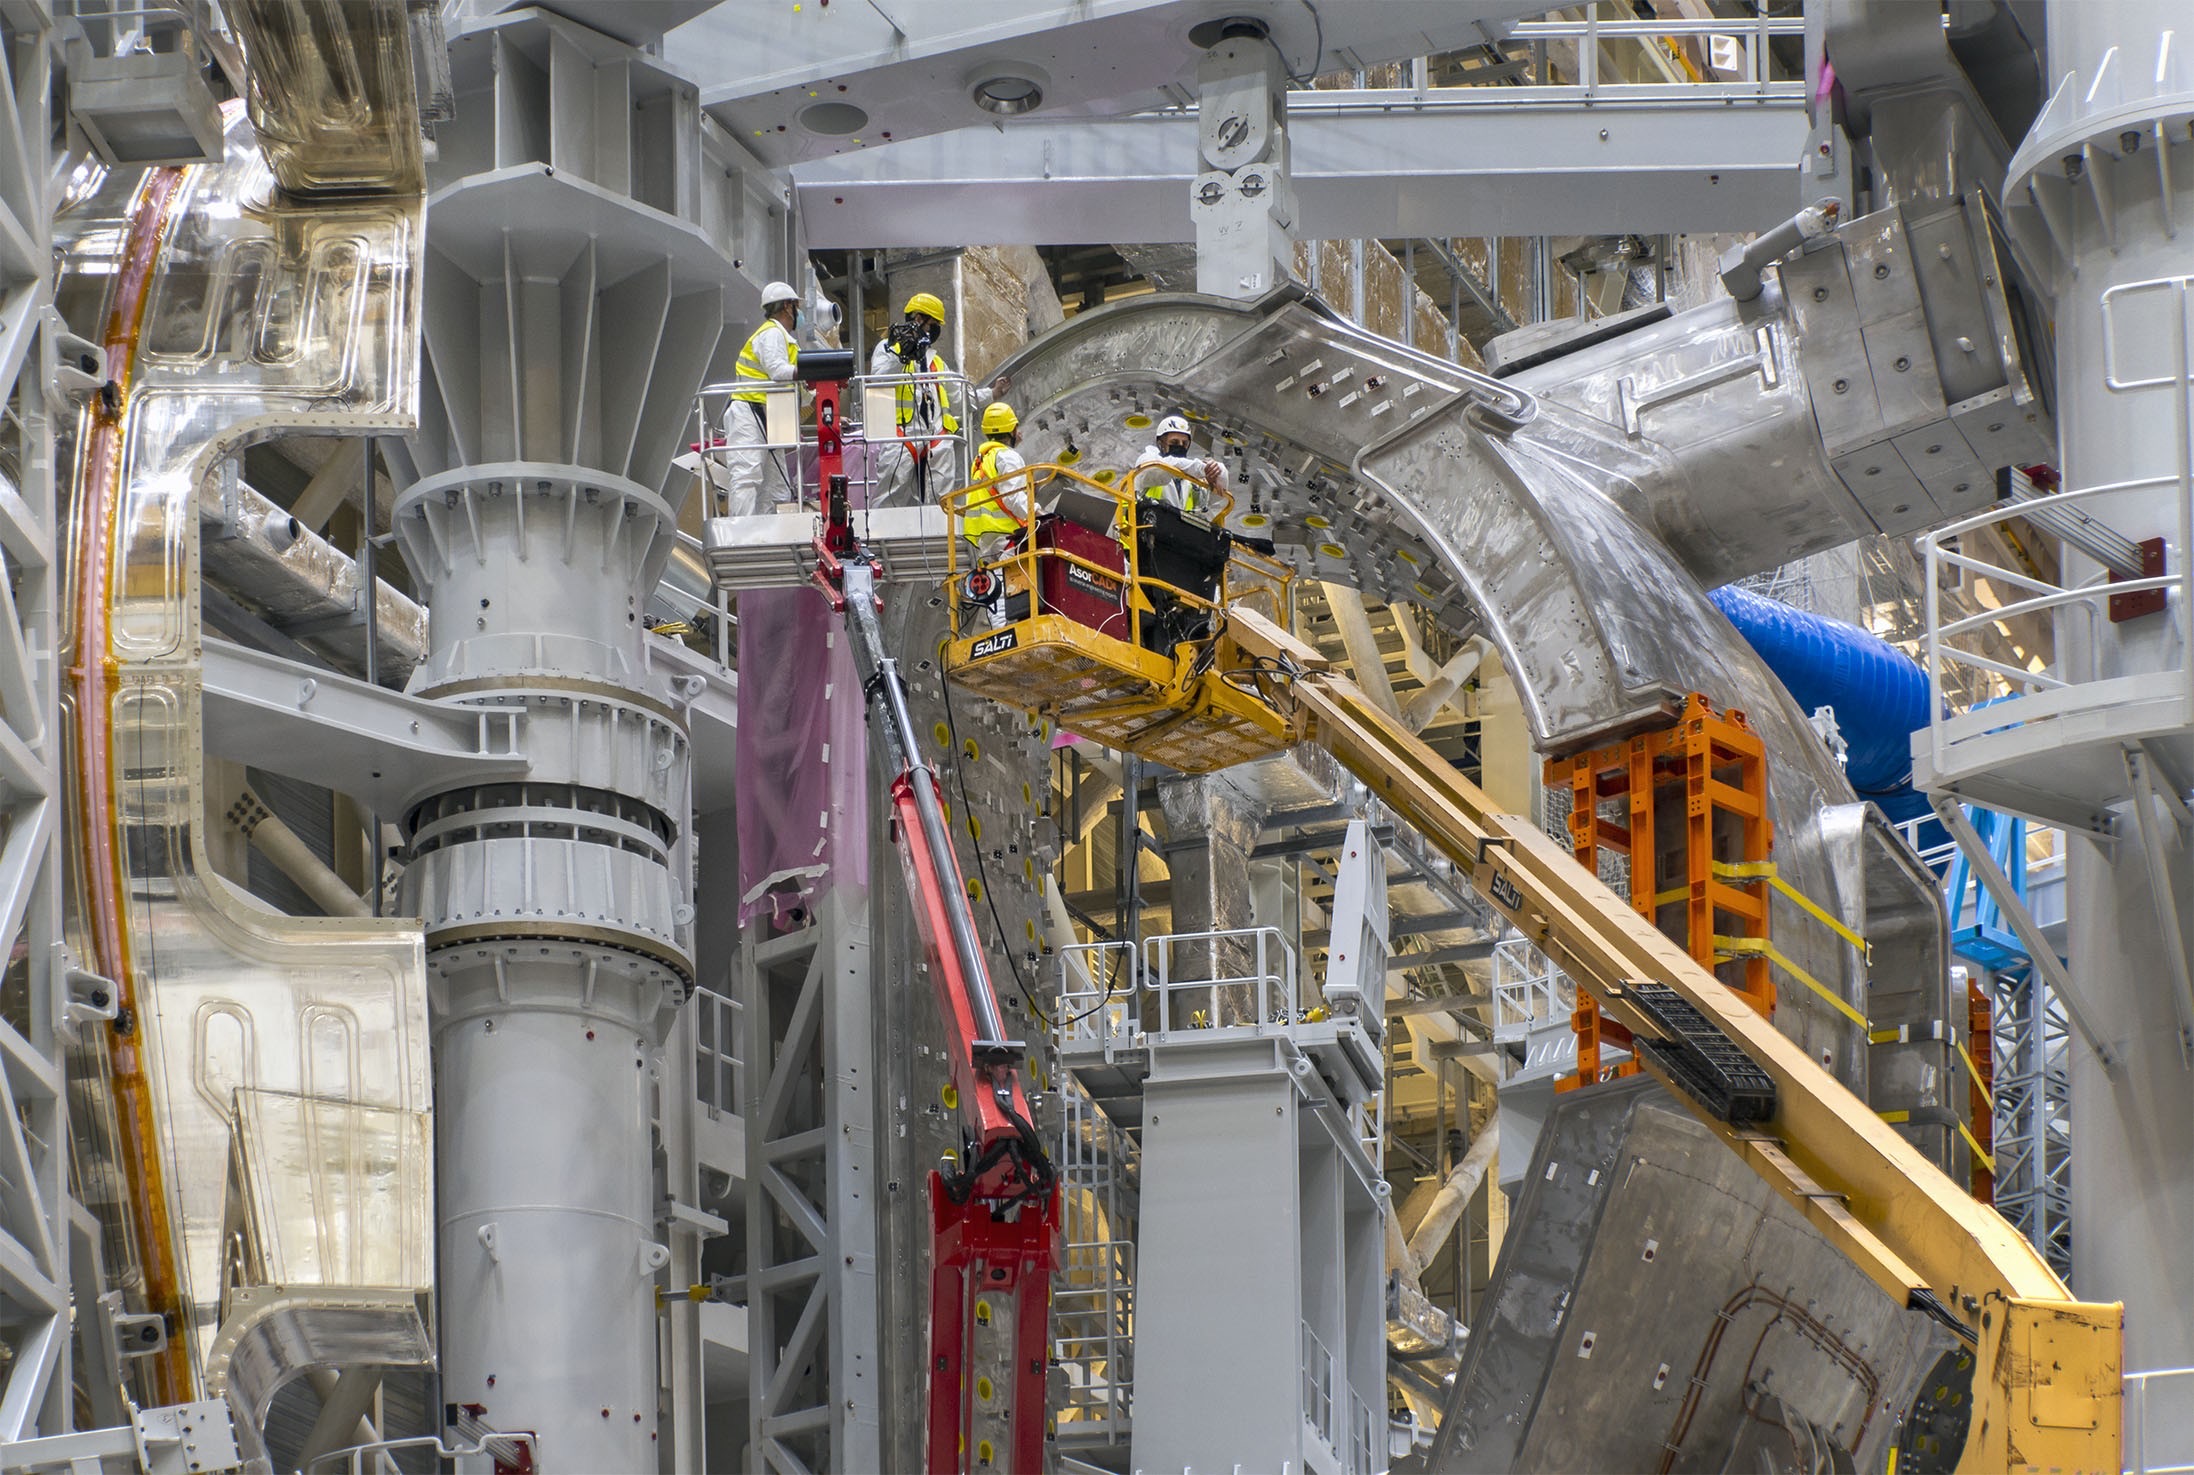 Wide view of the working environment of the ITER project, with two extended cranes with platforms on which four people with helmets and safety vests are standing.